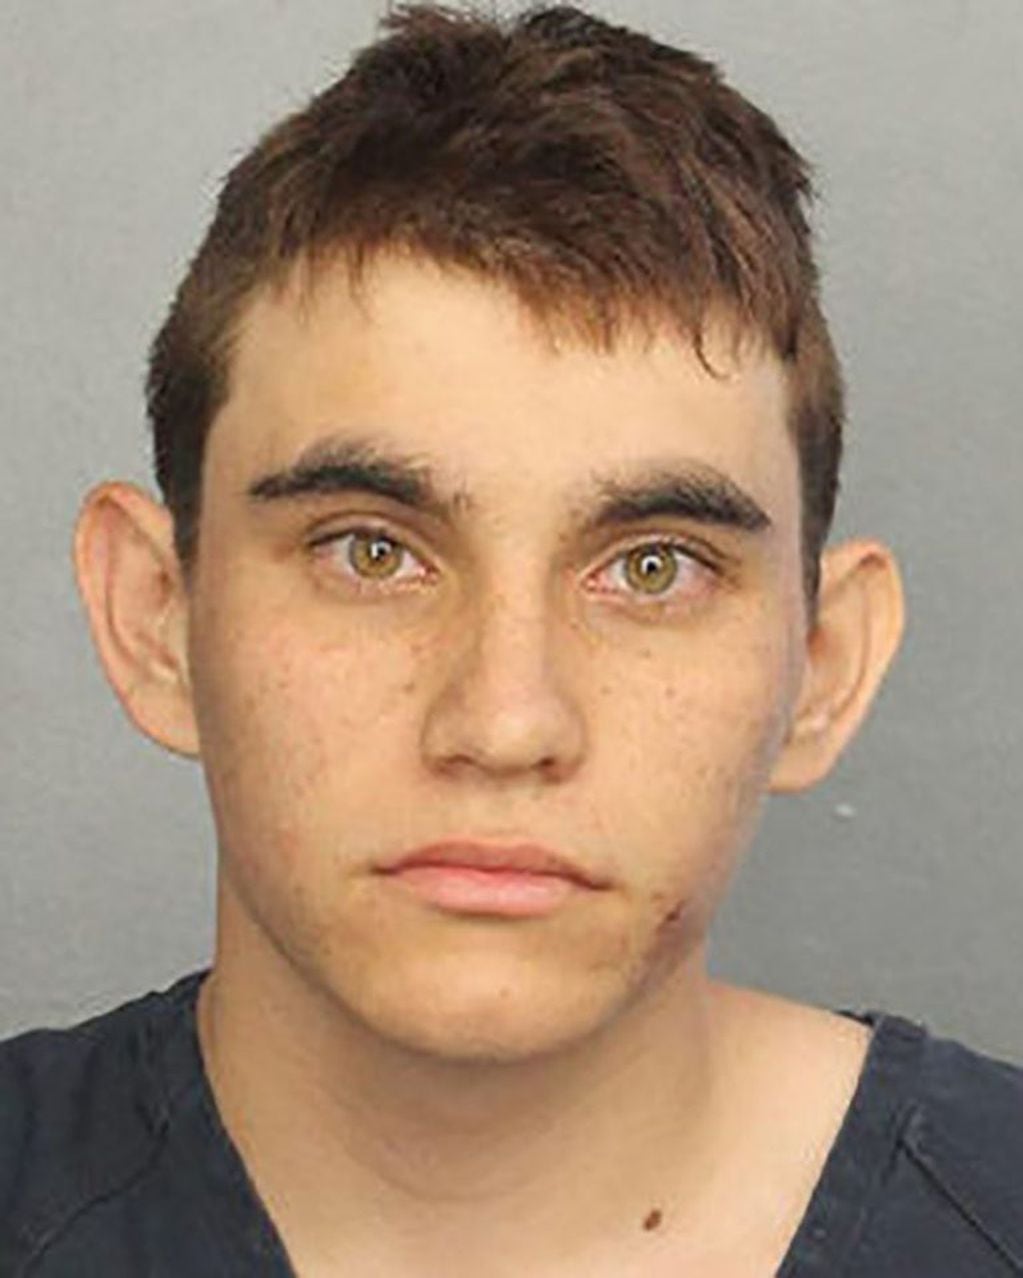 TOPSHOT - This booking photo obtained February 15, 2018 courtesy of the Broward County Sheriff's Office shows shooting suspect Nikolas Cruz.

Authorities in Florida could offer no explanation Wednesday night as to why a former student armed with an AR-15 rifle opened fire at a high school earlier that day, killing at least 17 people. Broward County Sheriff Scott Israel identified the gunman as Nikolas Cruz, 19, a former student at Marjory Stoneman Douglas High School in Parkland who had been expelled for "disciplinary reasons," but was currently enrolled in Broward County Public Schools.Cruz, whose fellow students described him as "troubled," was arrested without incident in the nearby town of Coral Springs after the Valentine's Day rampage and taken to hospital with minor injuries, the sheriff said.
 / AFP PHOTO / Broward County Sheriff's Office / Handout / RESTRICTED TO EDITORIAL USE - MANDATORY CREDIT "AFP PHOTO / BROWARD COUNTY SHERIFF'S OFFICE/HANDOUT" - NO MARKETING NO ADVERTISIN